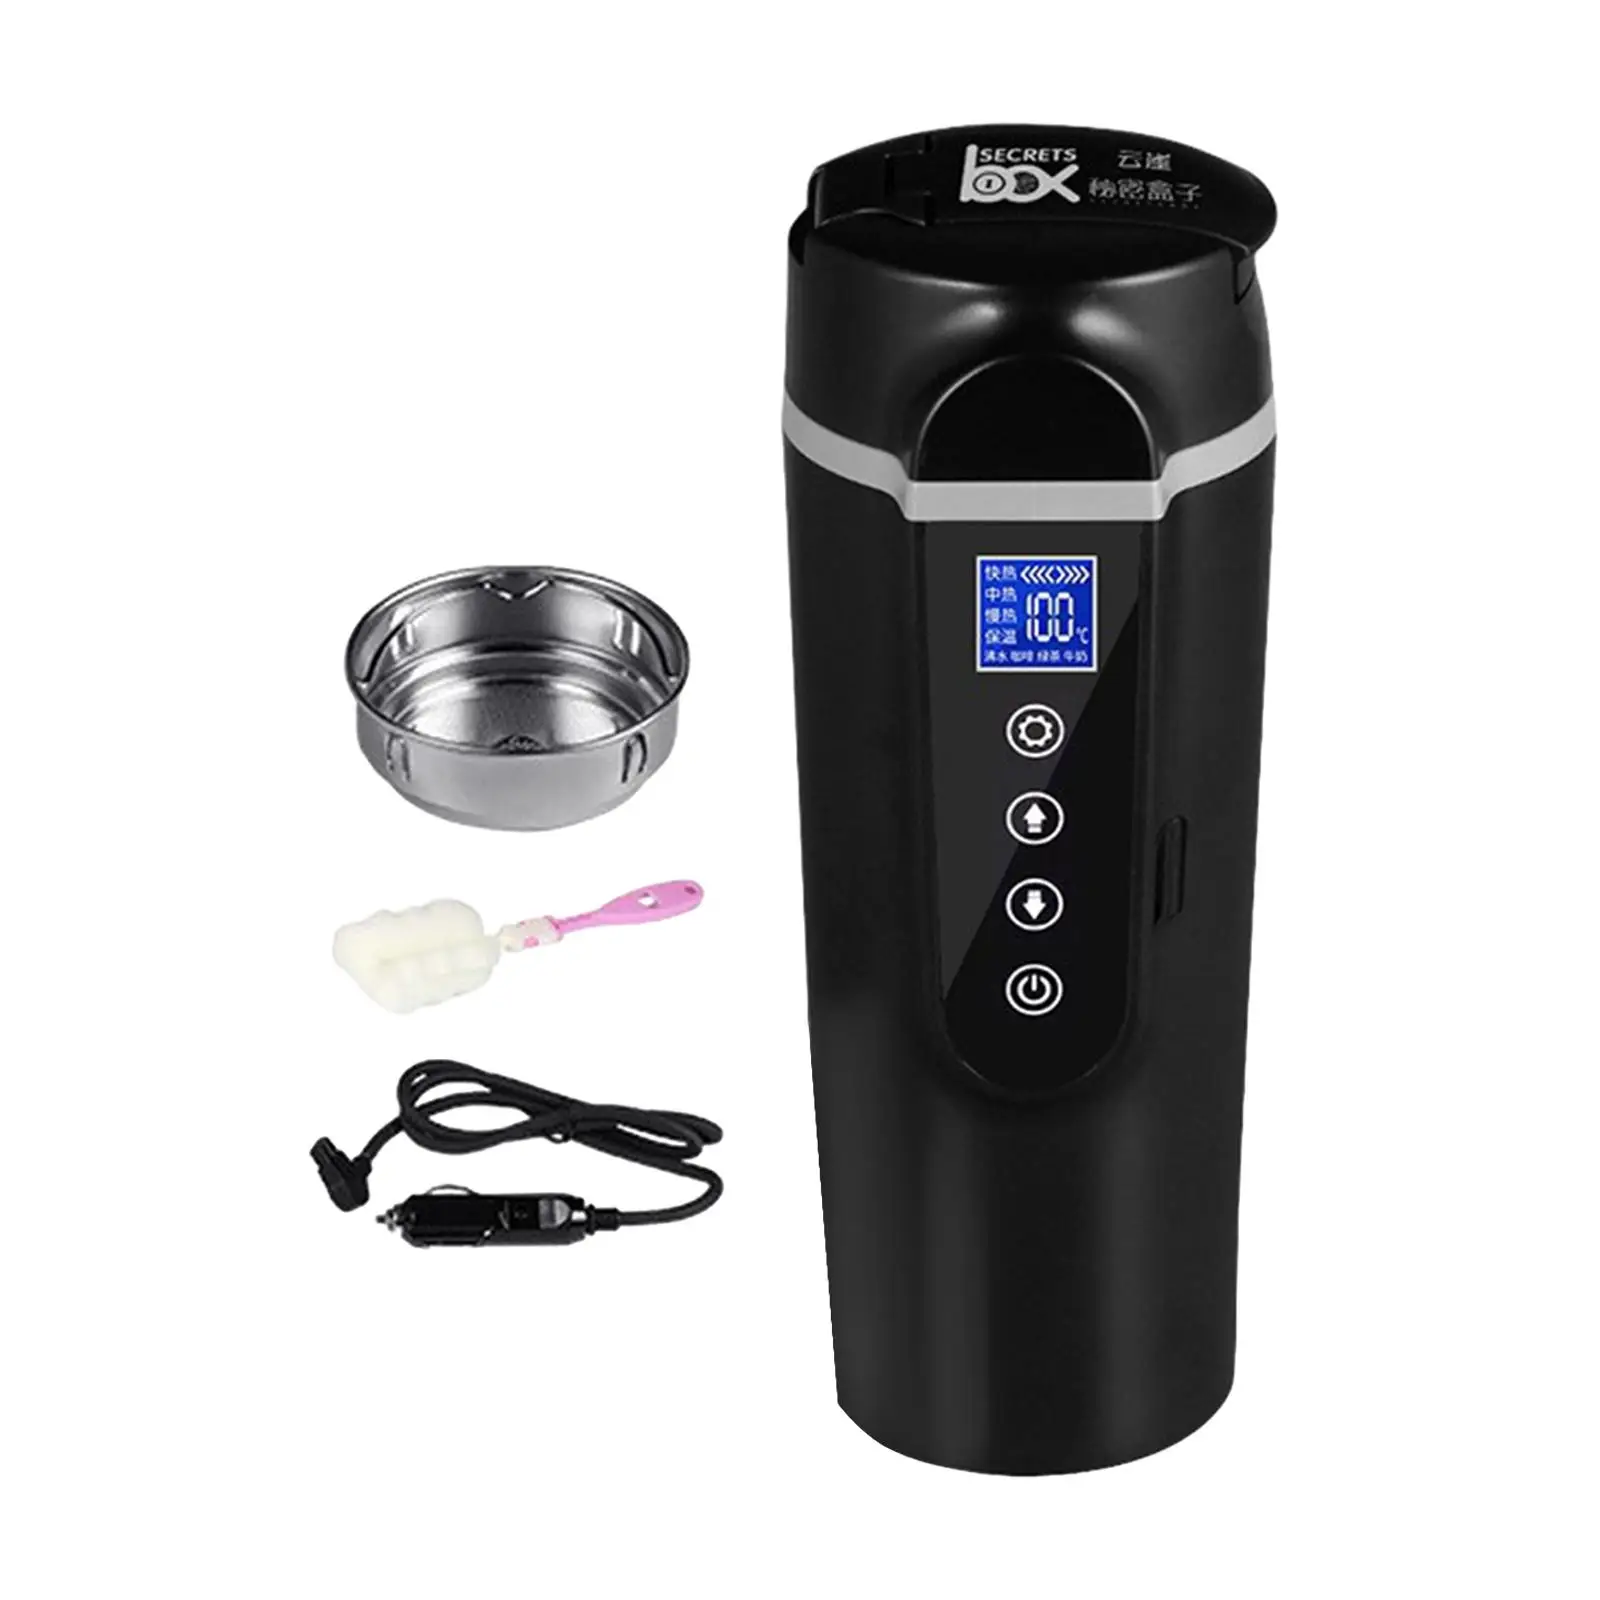 Car Heating Cup Travel Coffee Mugs Warmer for Auto Car Airplane Camping